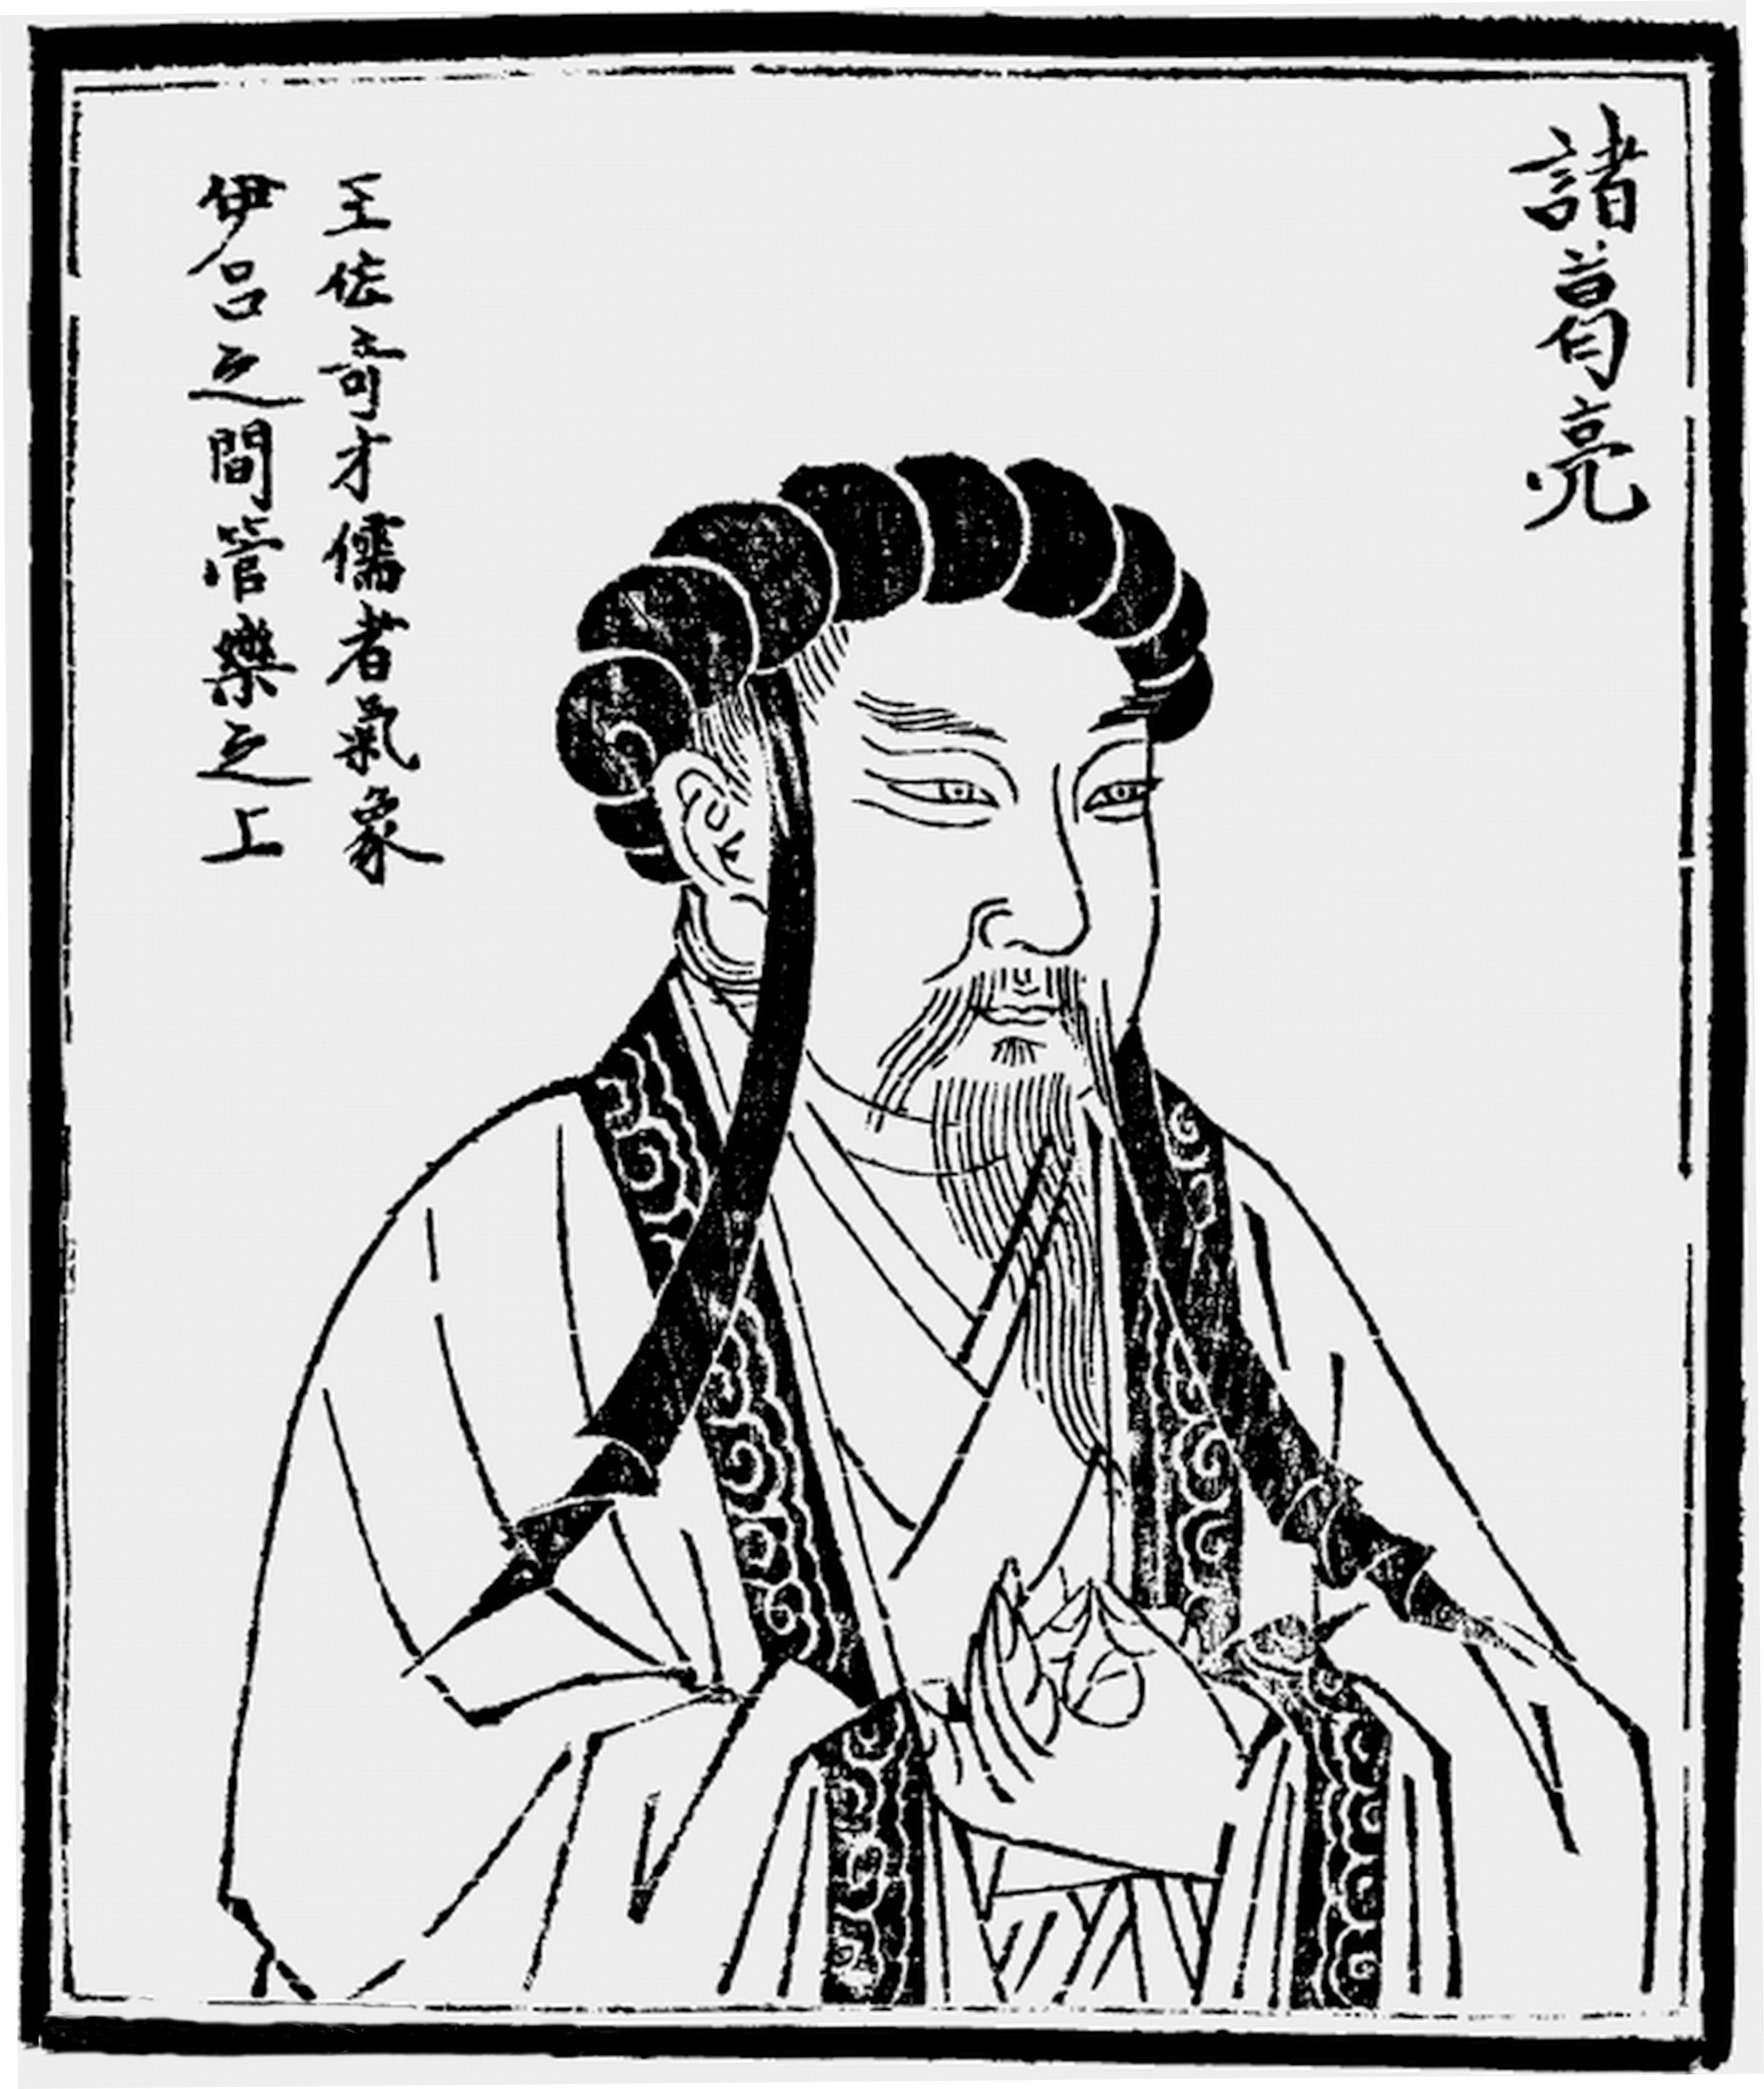 Zhuge Liang was Chancellor of Shu Han during the Three Kingdoms period of Chinese history.